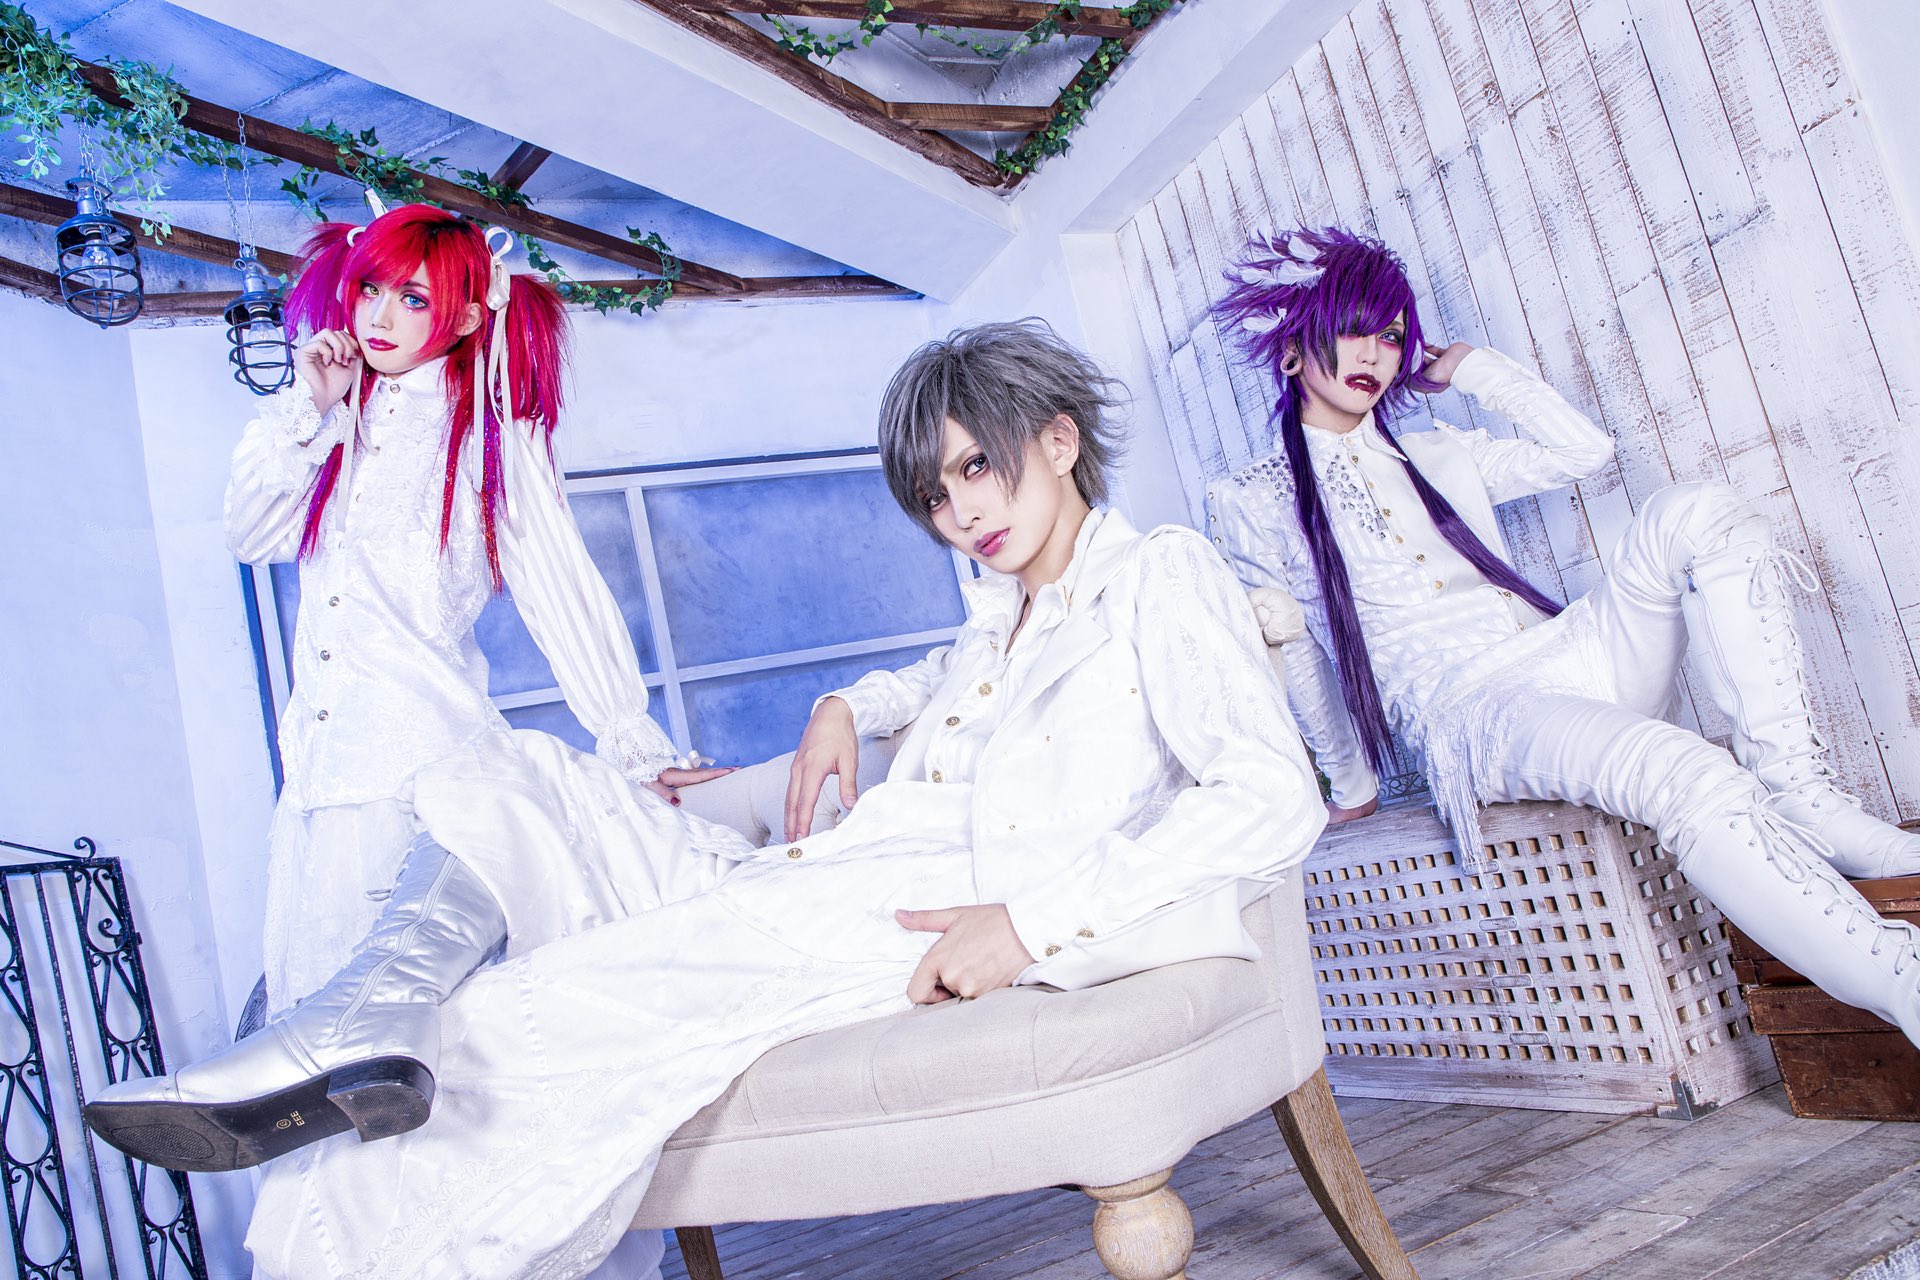 Z clear – New bassist, “Paint” single details, lyric video and new look